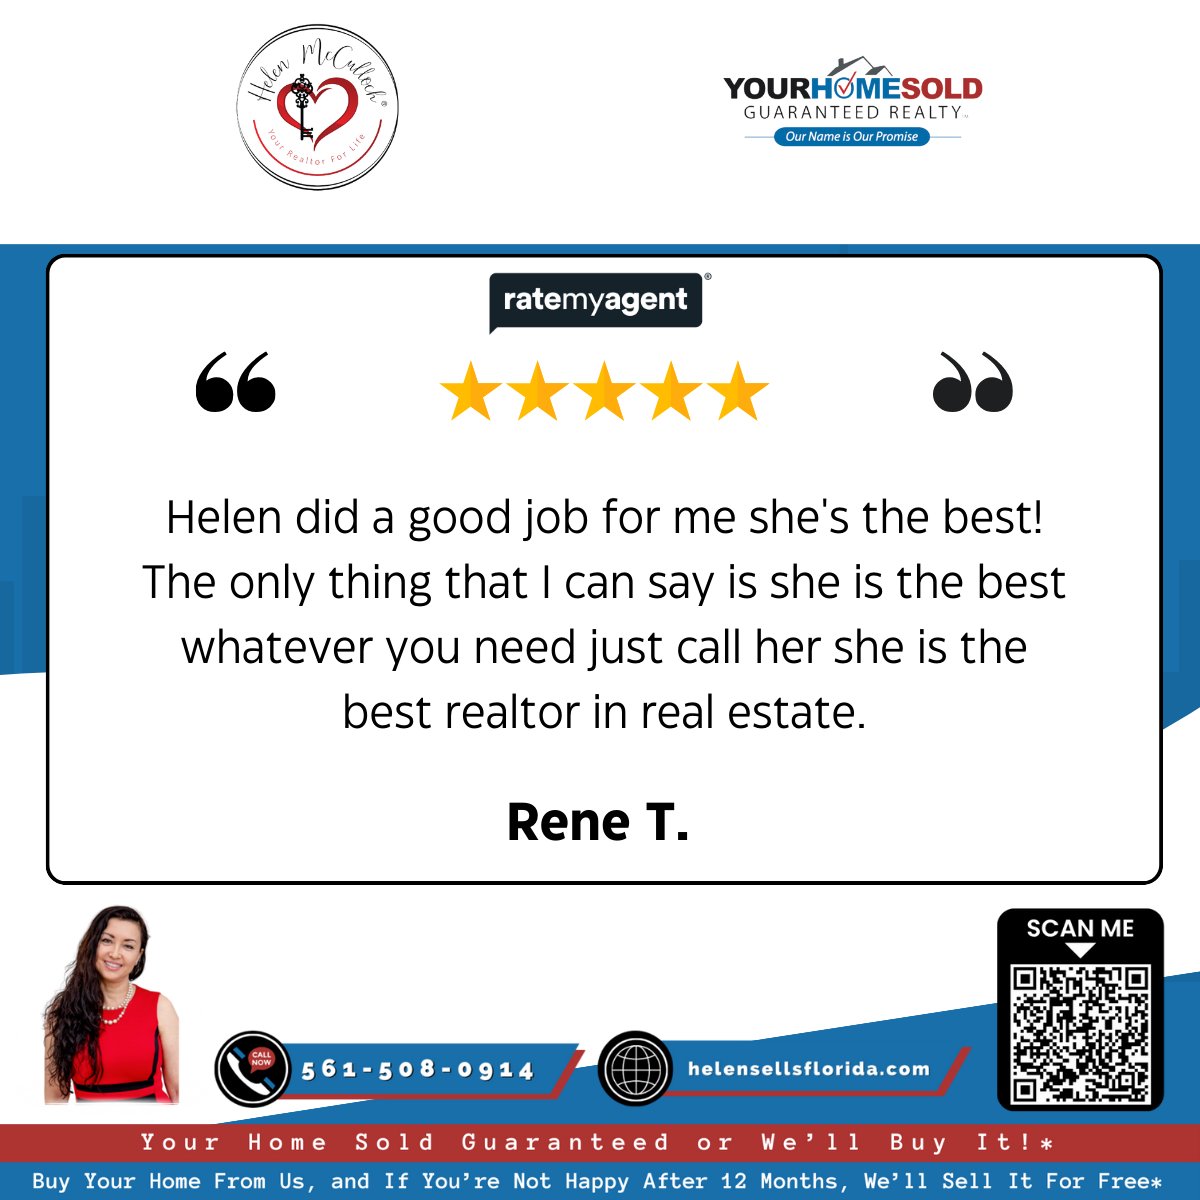 ⭐⭐⭐⭐⭐
The Best Realtor!

'𝙔𝙤𝙪𝙧 𝙍𝙚𝙖𝙡𝙩𝙤𝙧 𝙁𝙤𝙧 𝙇𝙞𝙛𝙚!'

Call 📞561-508-0914 or Click👉 bit.ly/3S9VQp7 for your real estate needs!

#FiveStarReview #RealEstateReviews #Realtor #RealtorFL #RealEstateFlorida #RealEstateFL #RealEstateAgent #FloridaRealtor